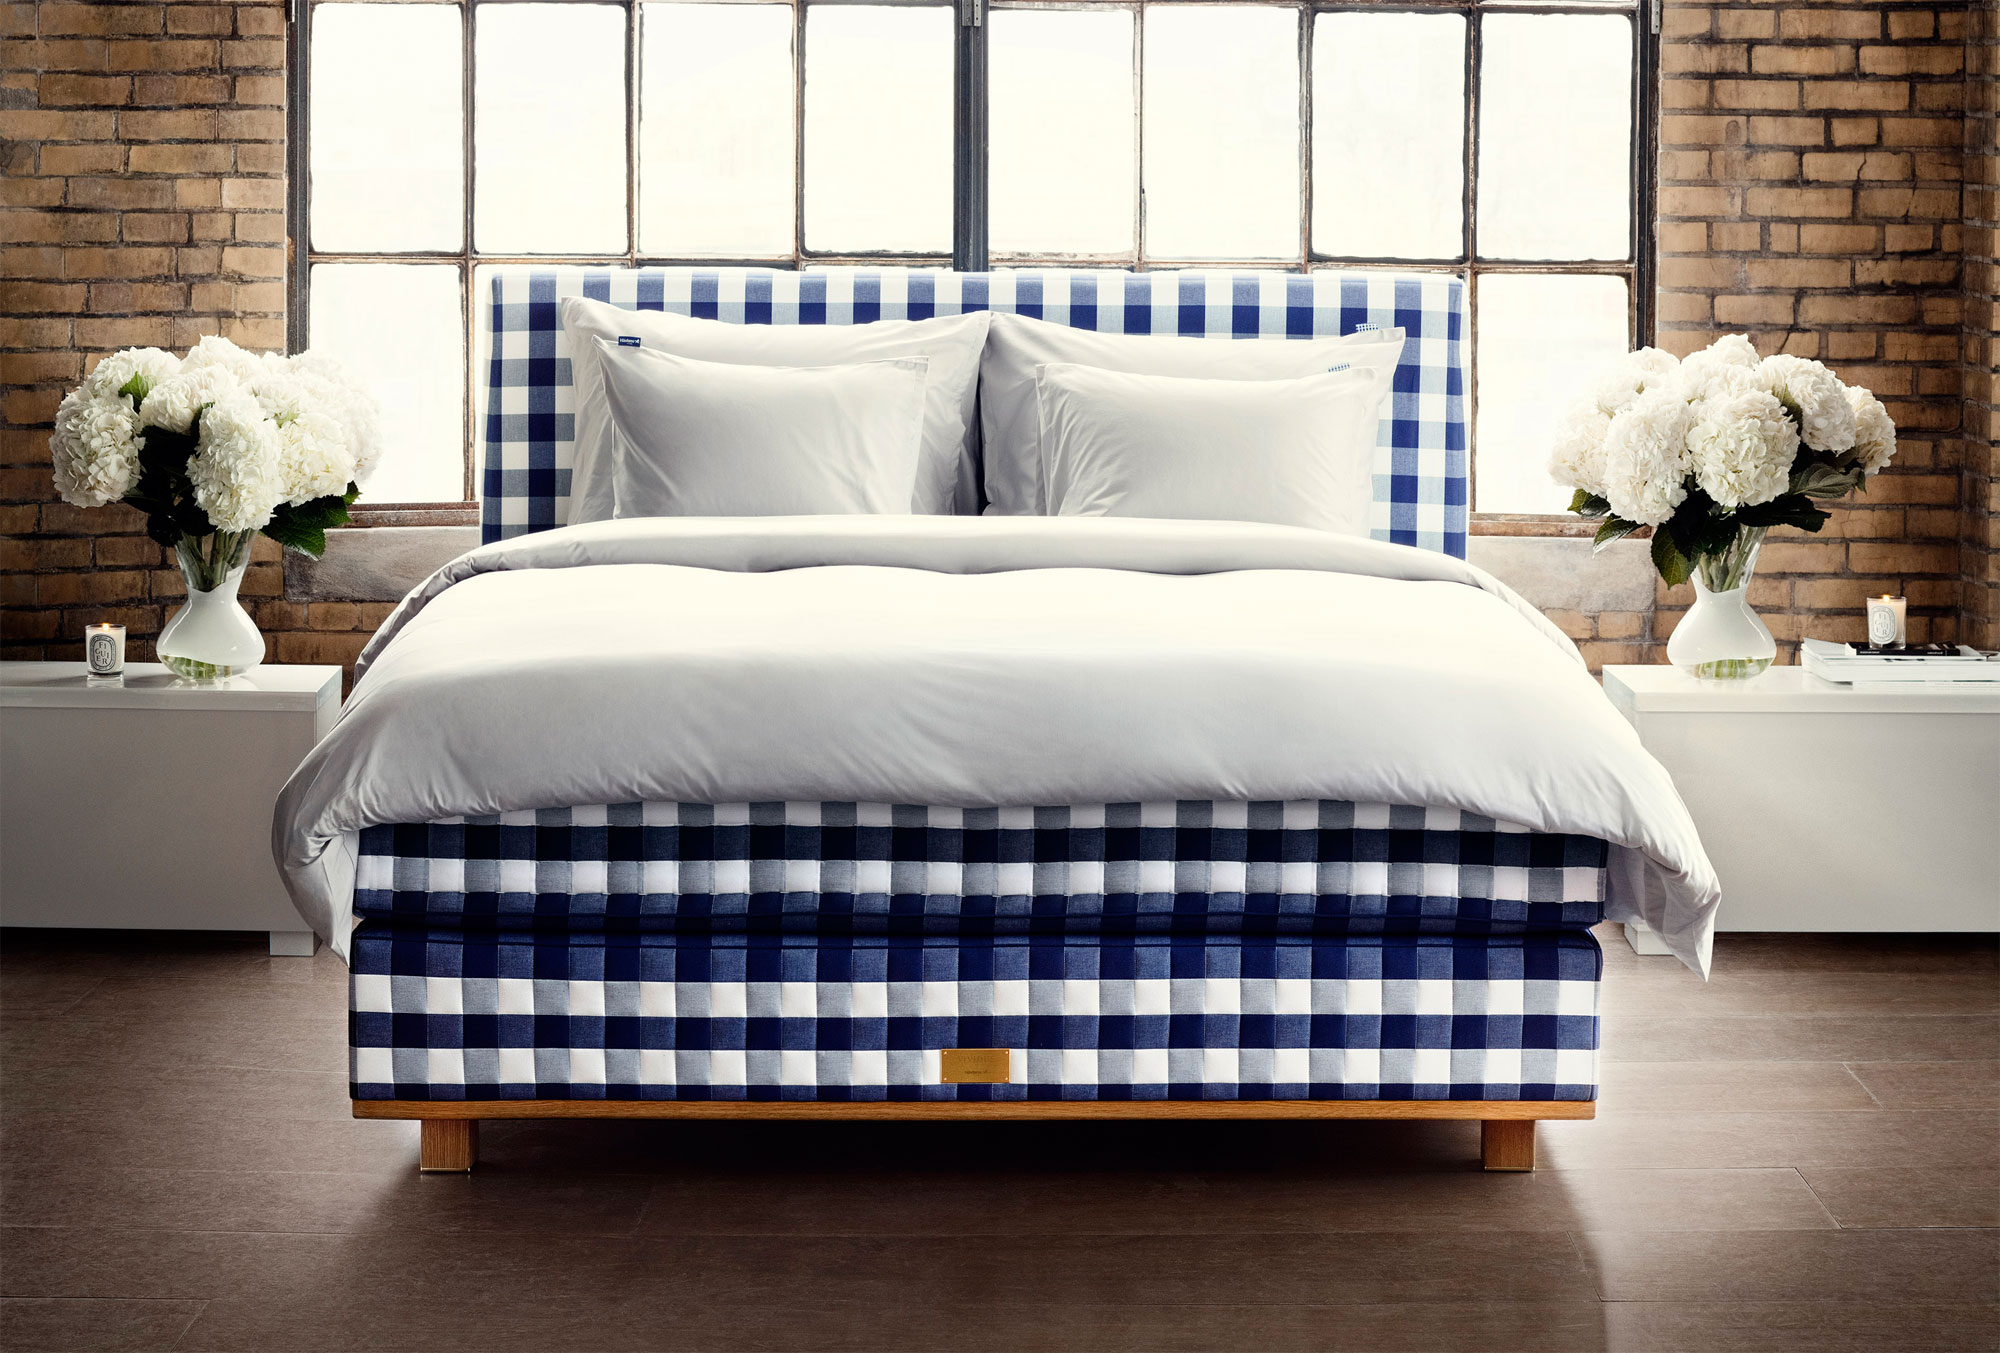 Cozy bedroom with a stylish blue and white checkered bed set against a brick wall, perfect as a HD desktop wallpaper or background.